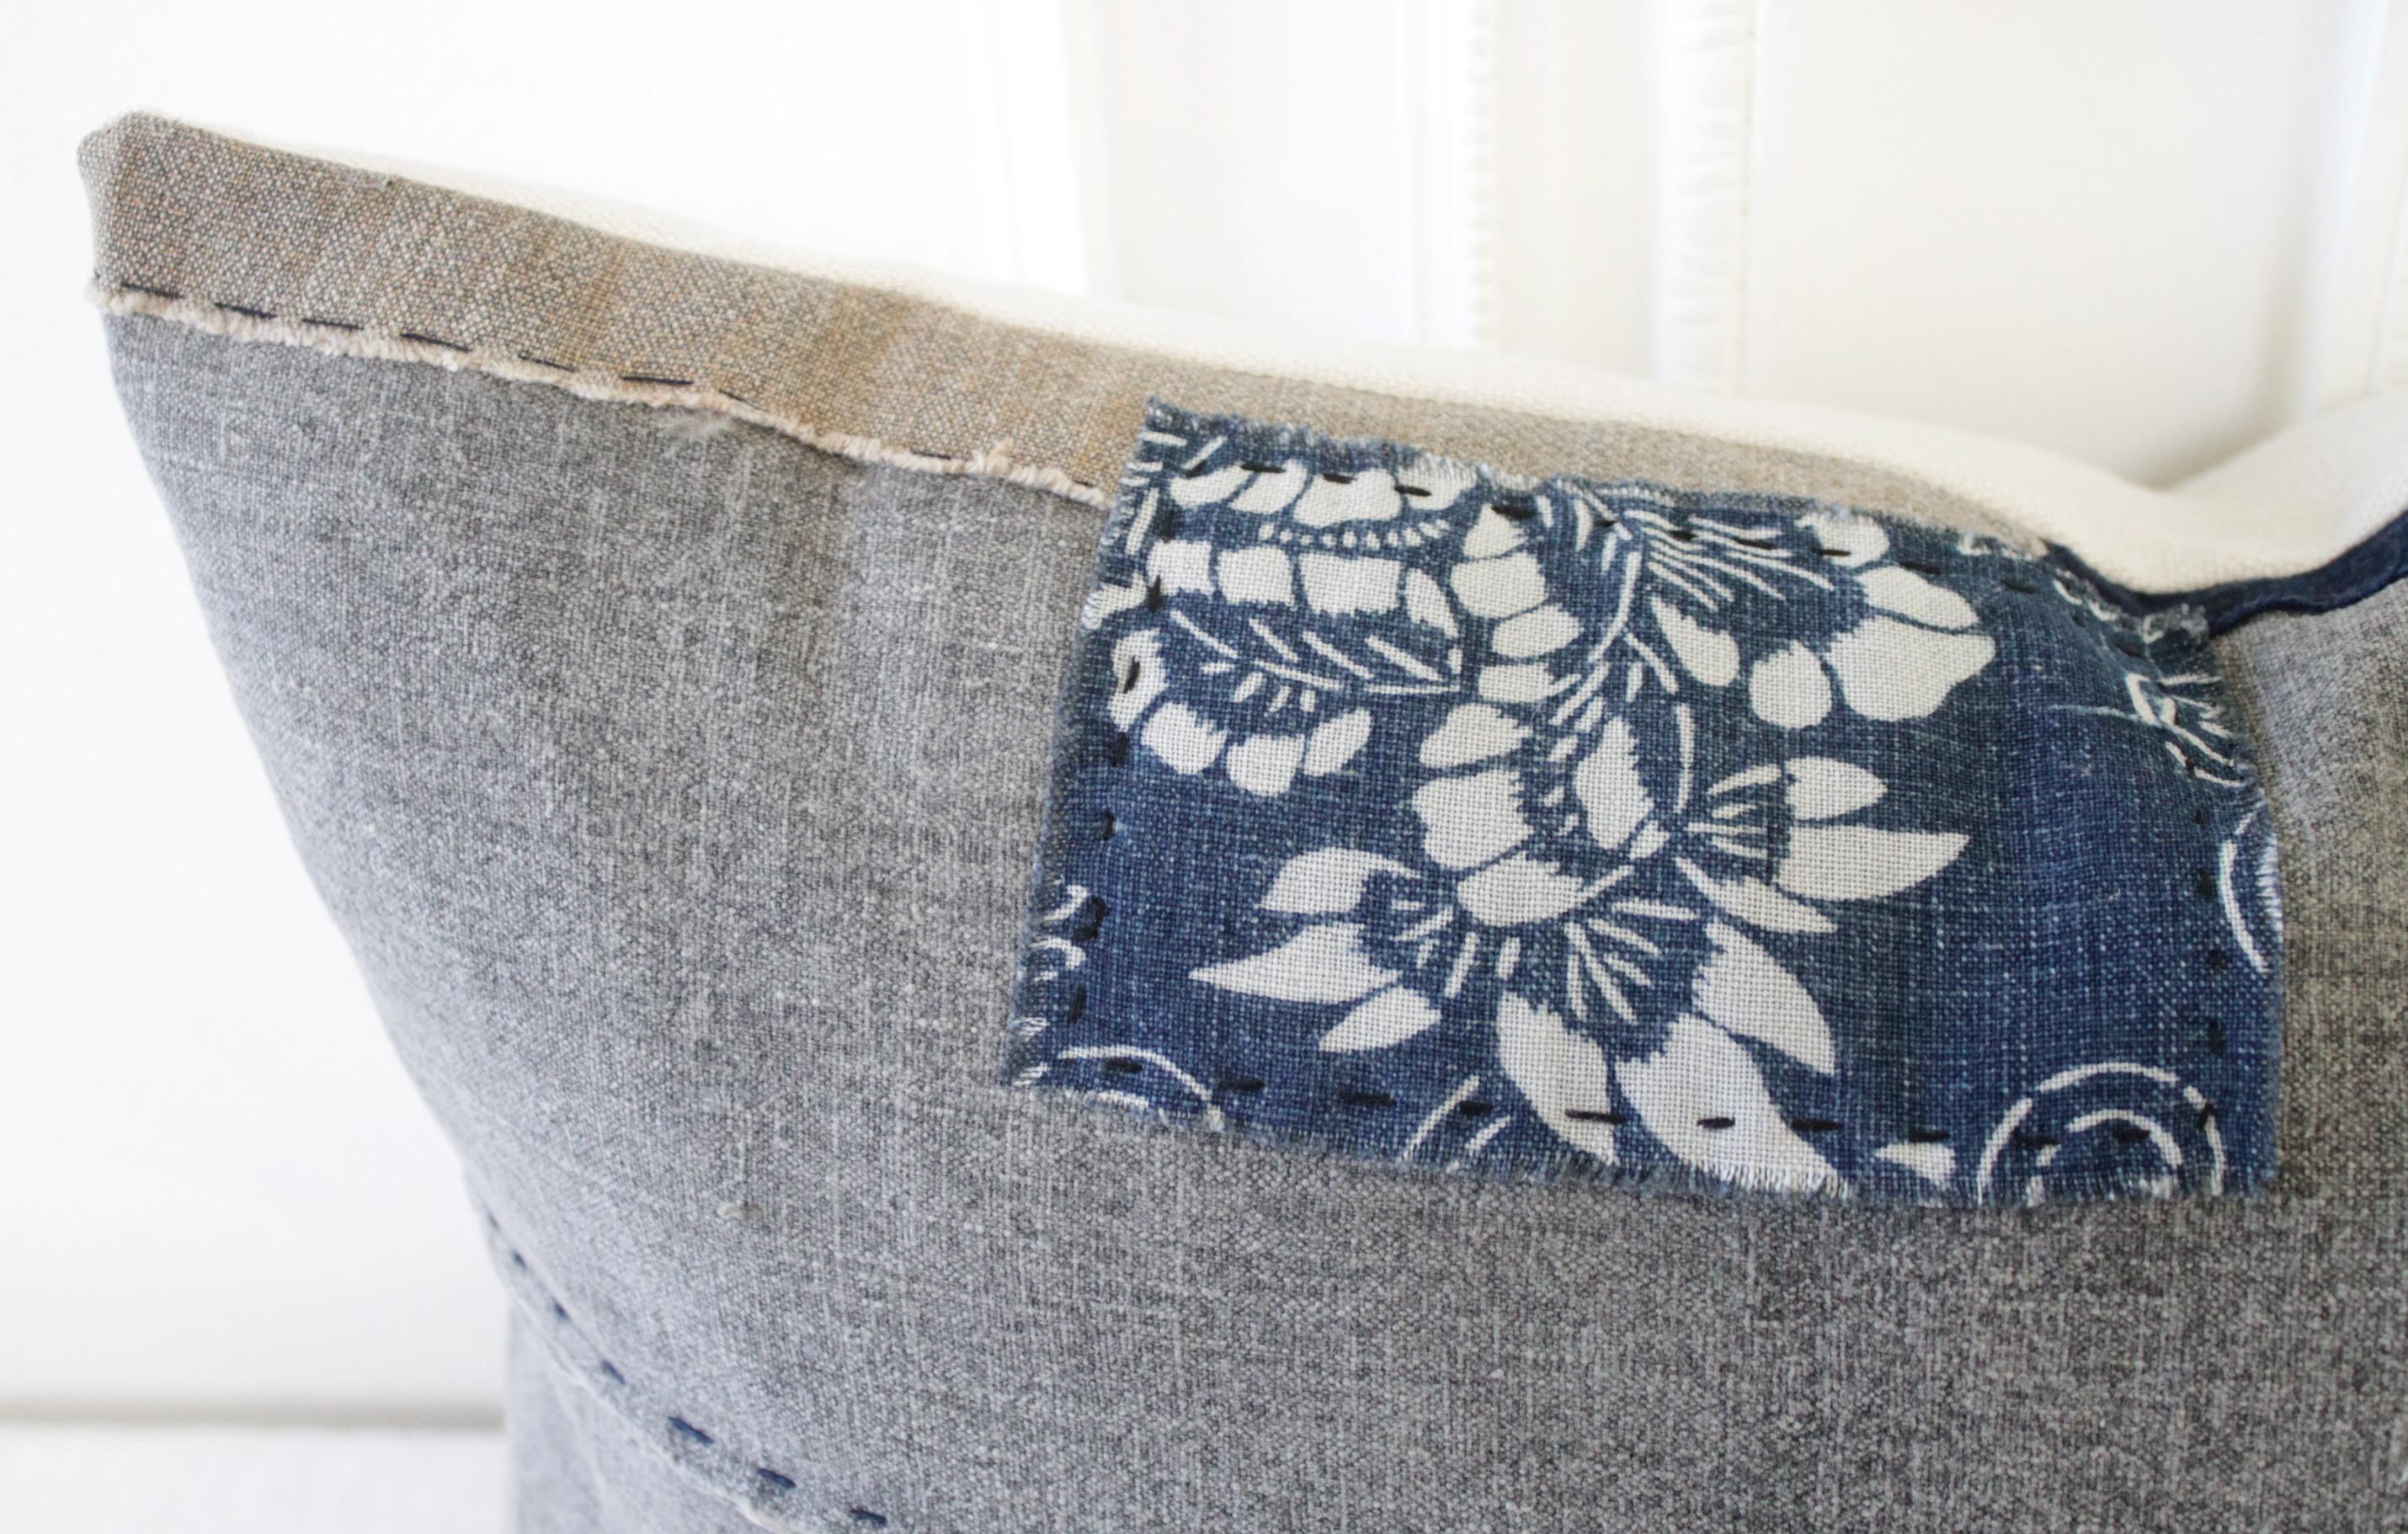 Vintage Japanese Boro textile accent lumbar pillow with patchwork
Beautiful custom designed in our Full Bloom Cottage Studio, this vintage Japanese textile is a medium gray color with original patchwork in a natural linen color, and we've kept and